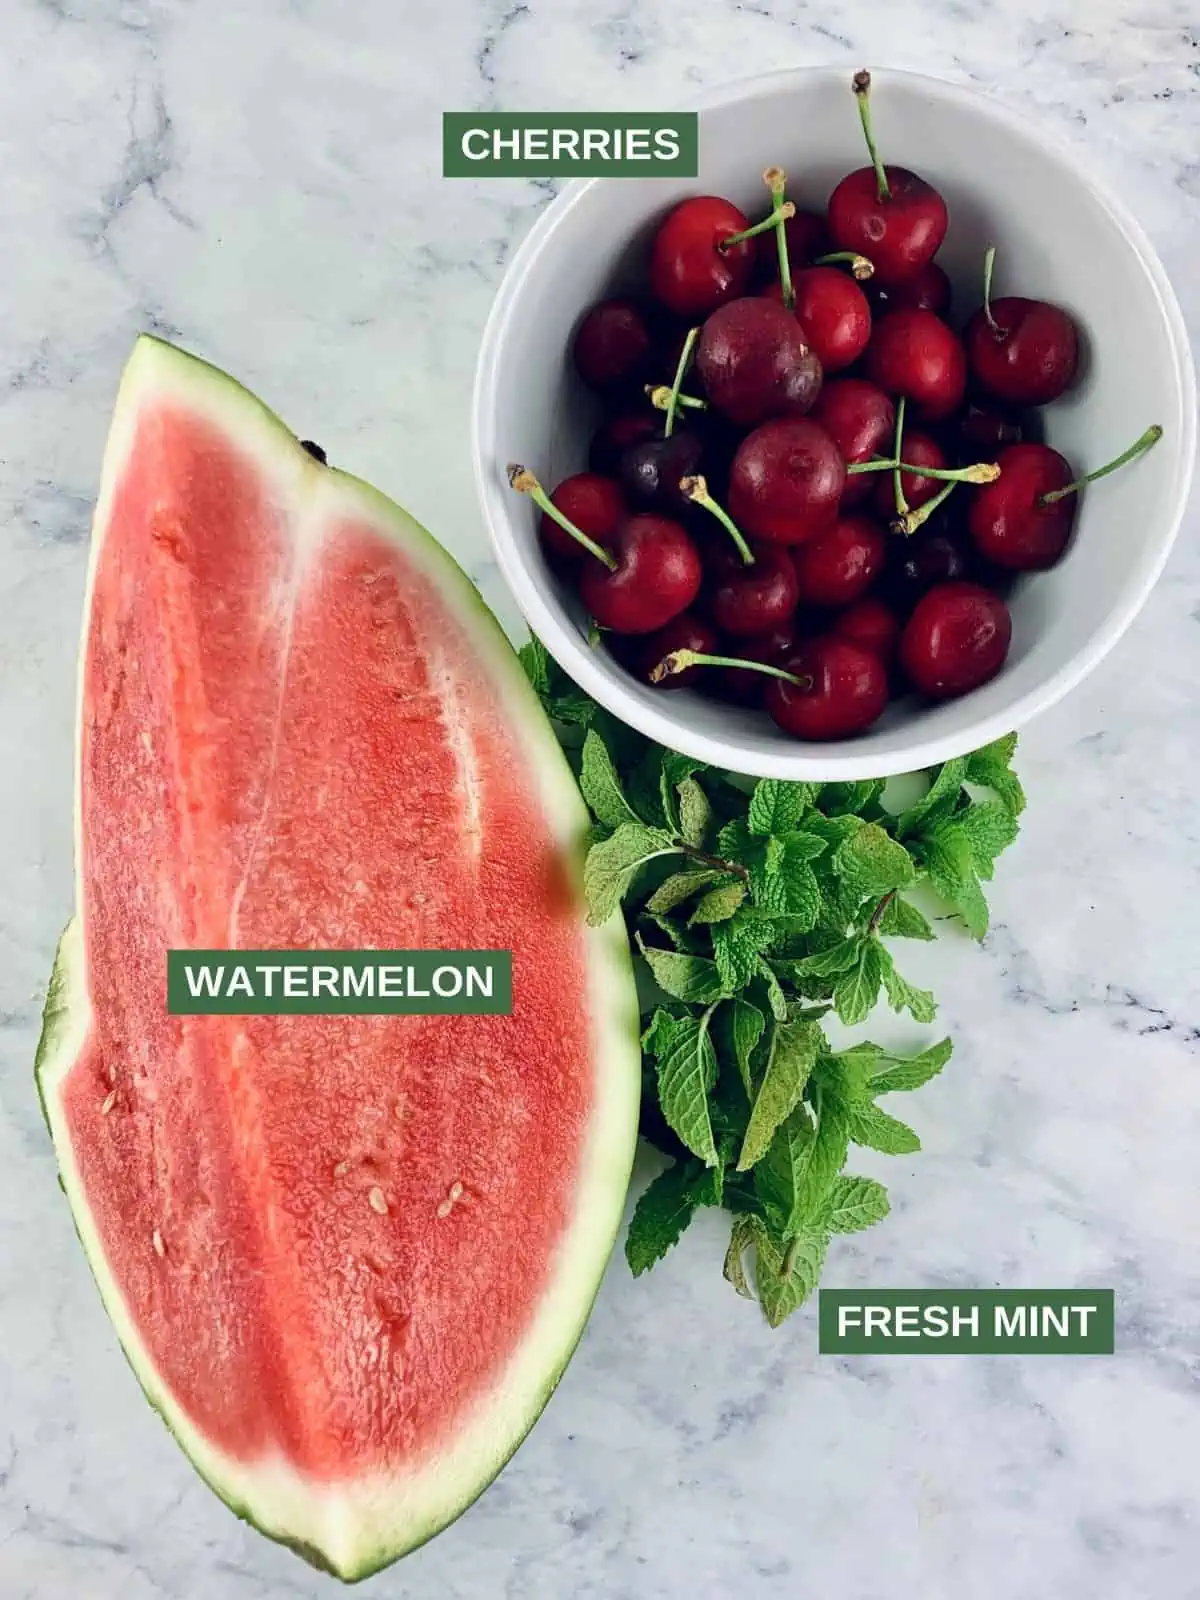 Labelled ingredients needed to make watermelon fruit salad.